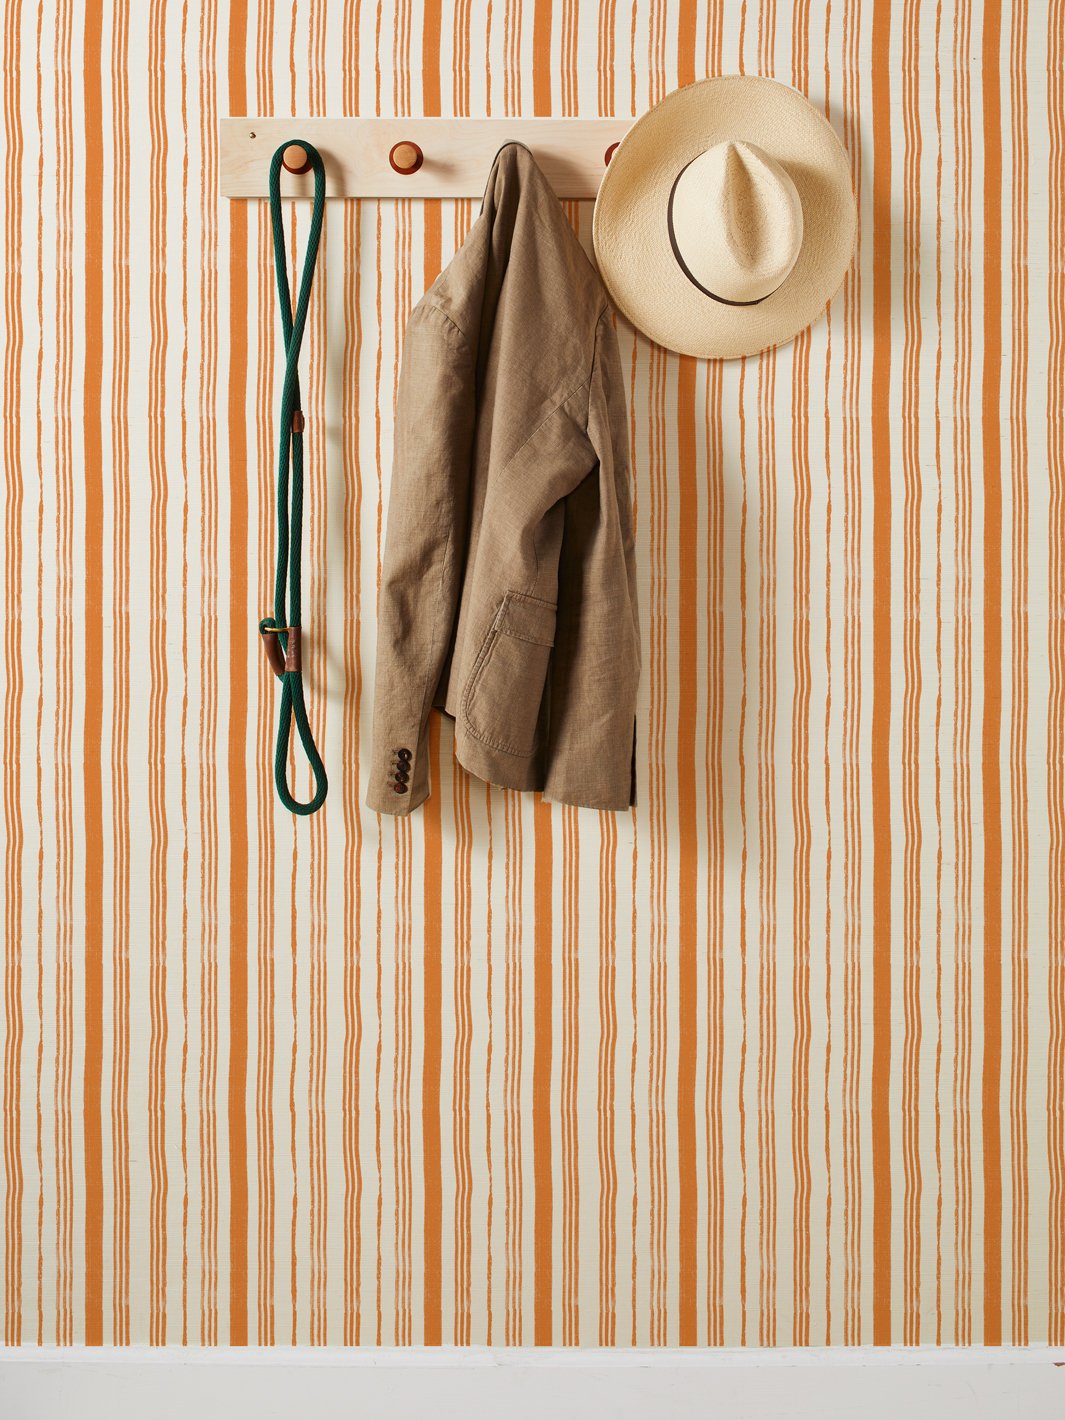 'Painted Stripes' Grasscloth' Wallpaper by Nathan Turner - Terracotta